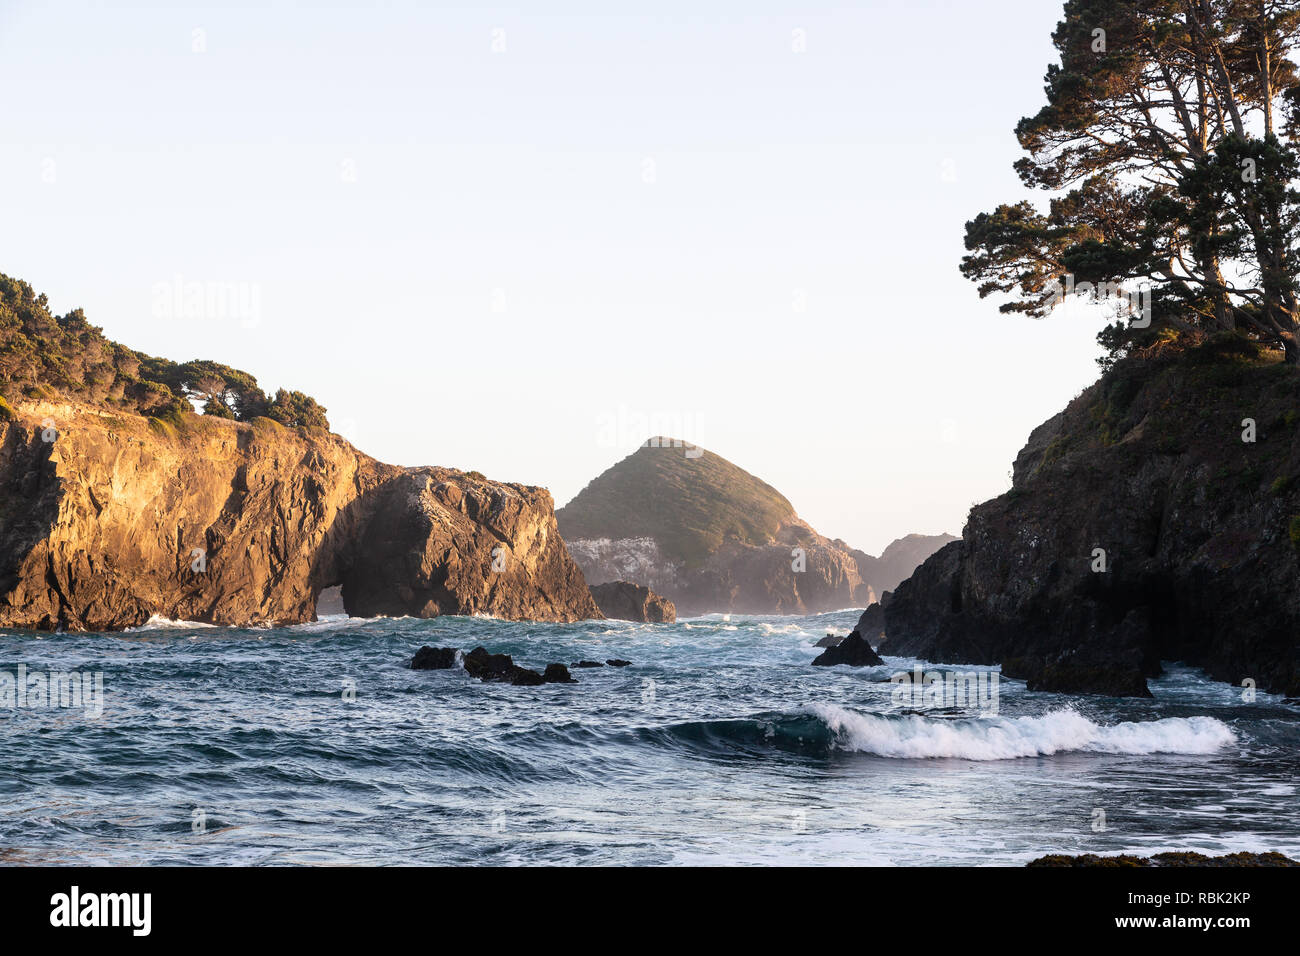 A quiet evening moment on the coast in Mendocino County before sunset. Stock Photo